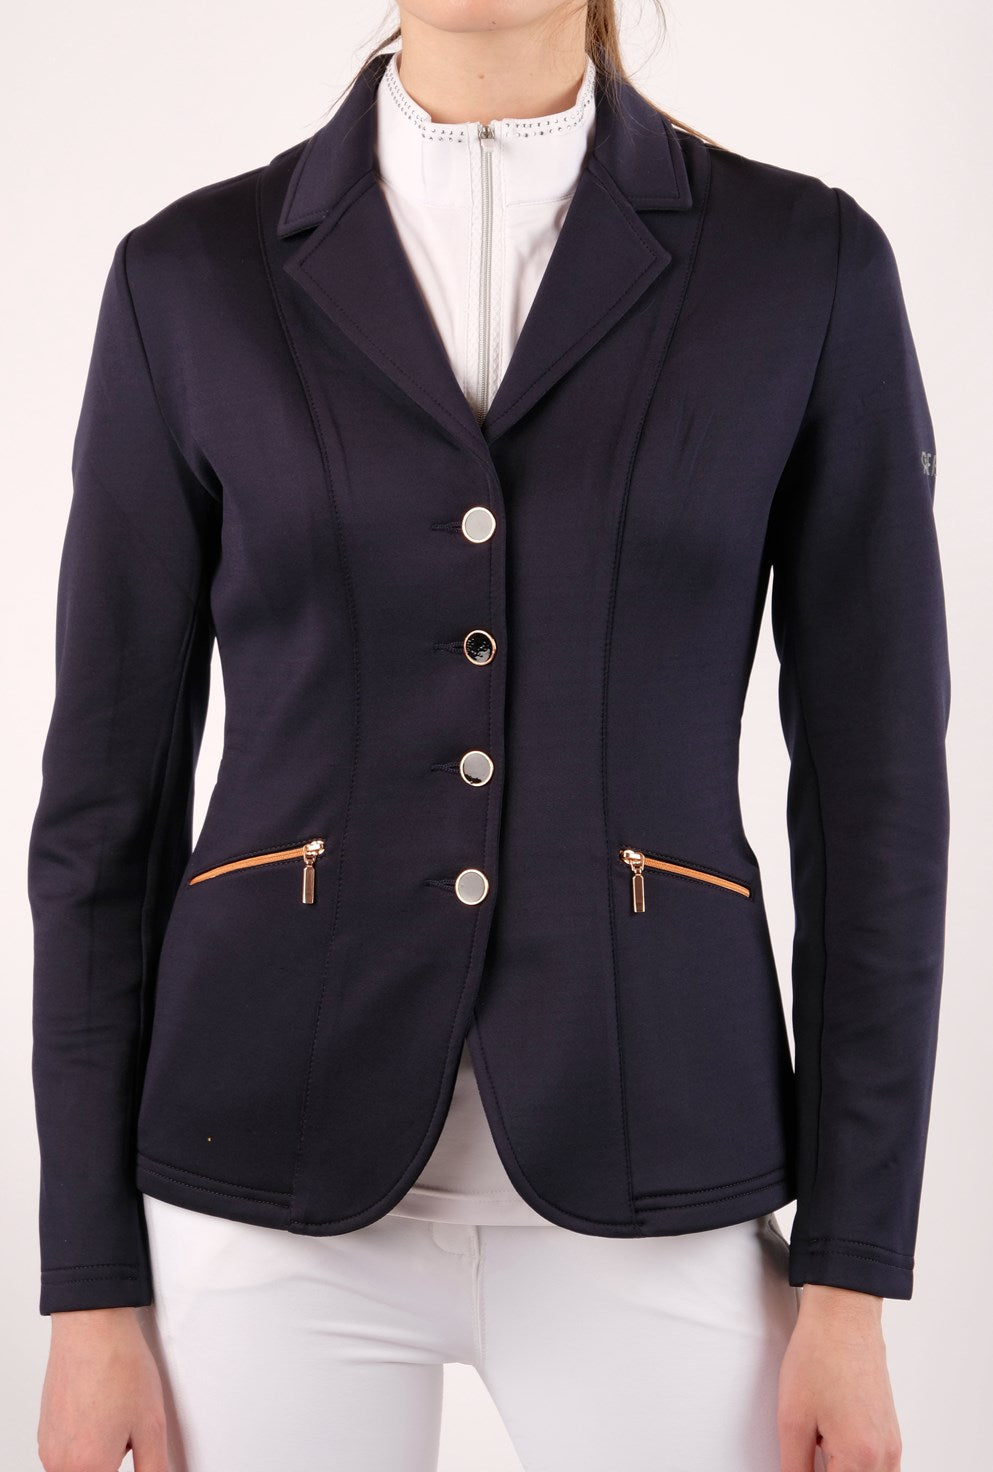 Rebel Competition jacket with gold - Navy